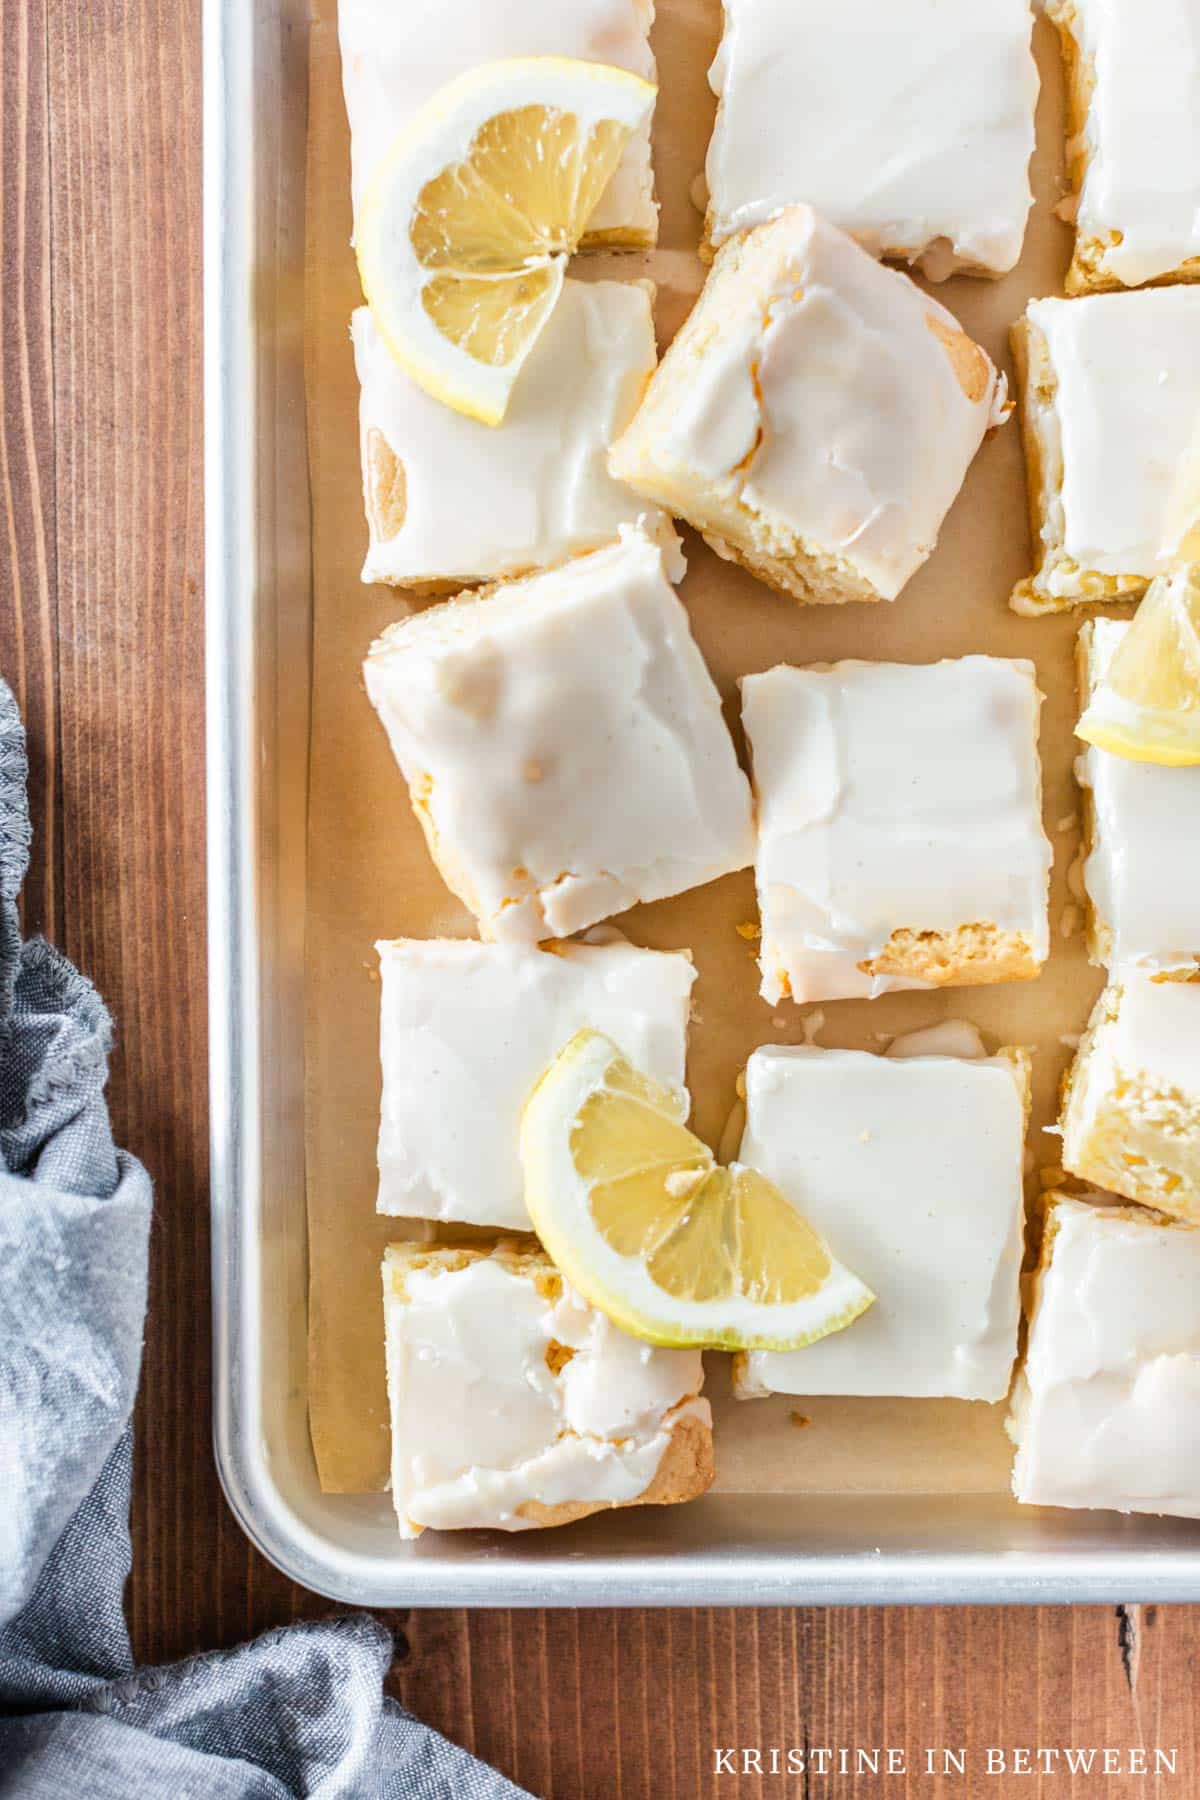 A pan of lemon brownies with lemon slices on top and a blue napkin laying next to them.